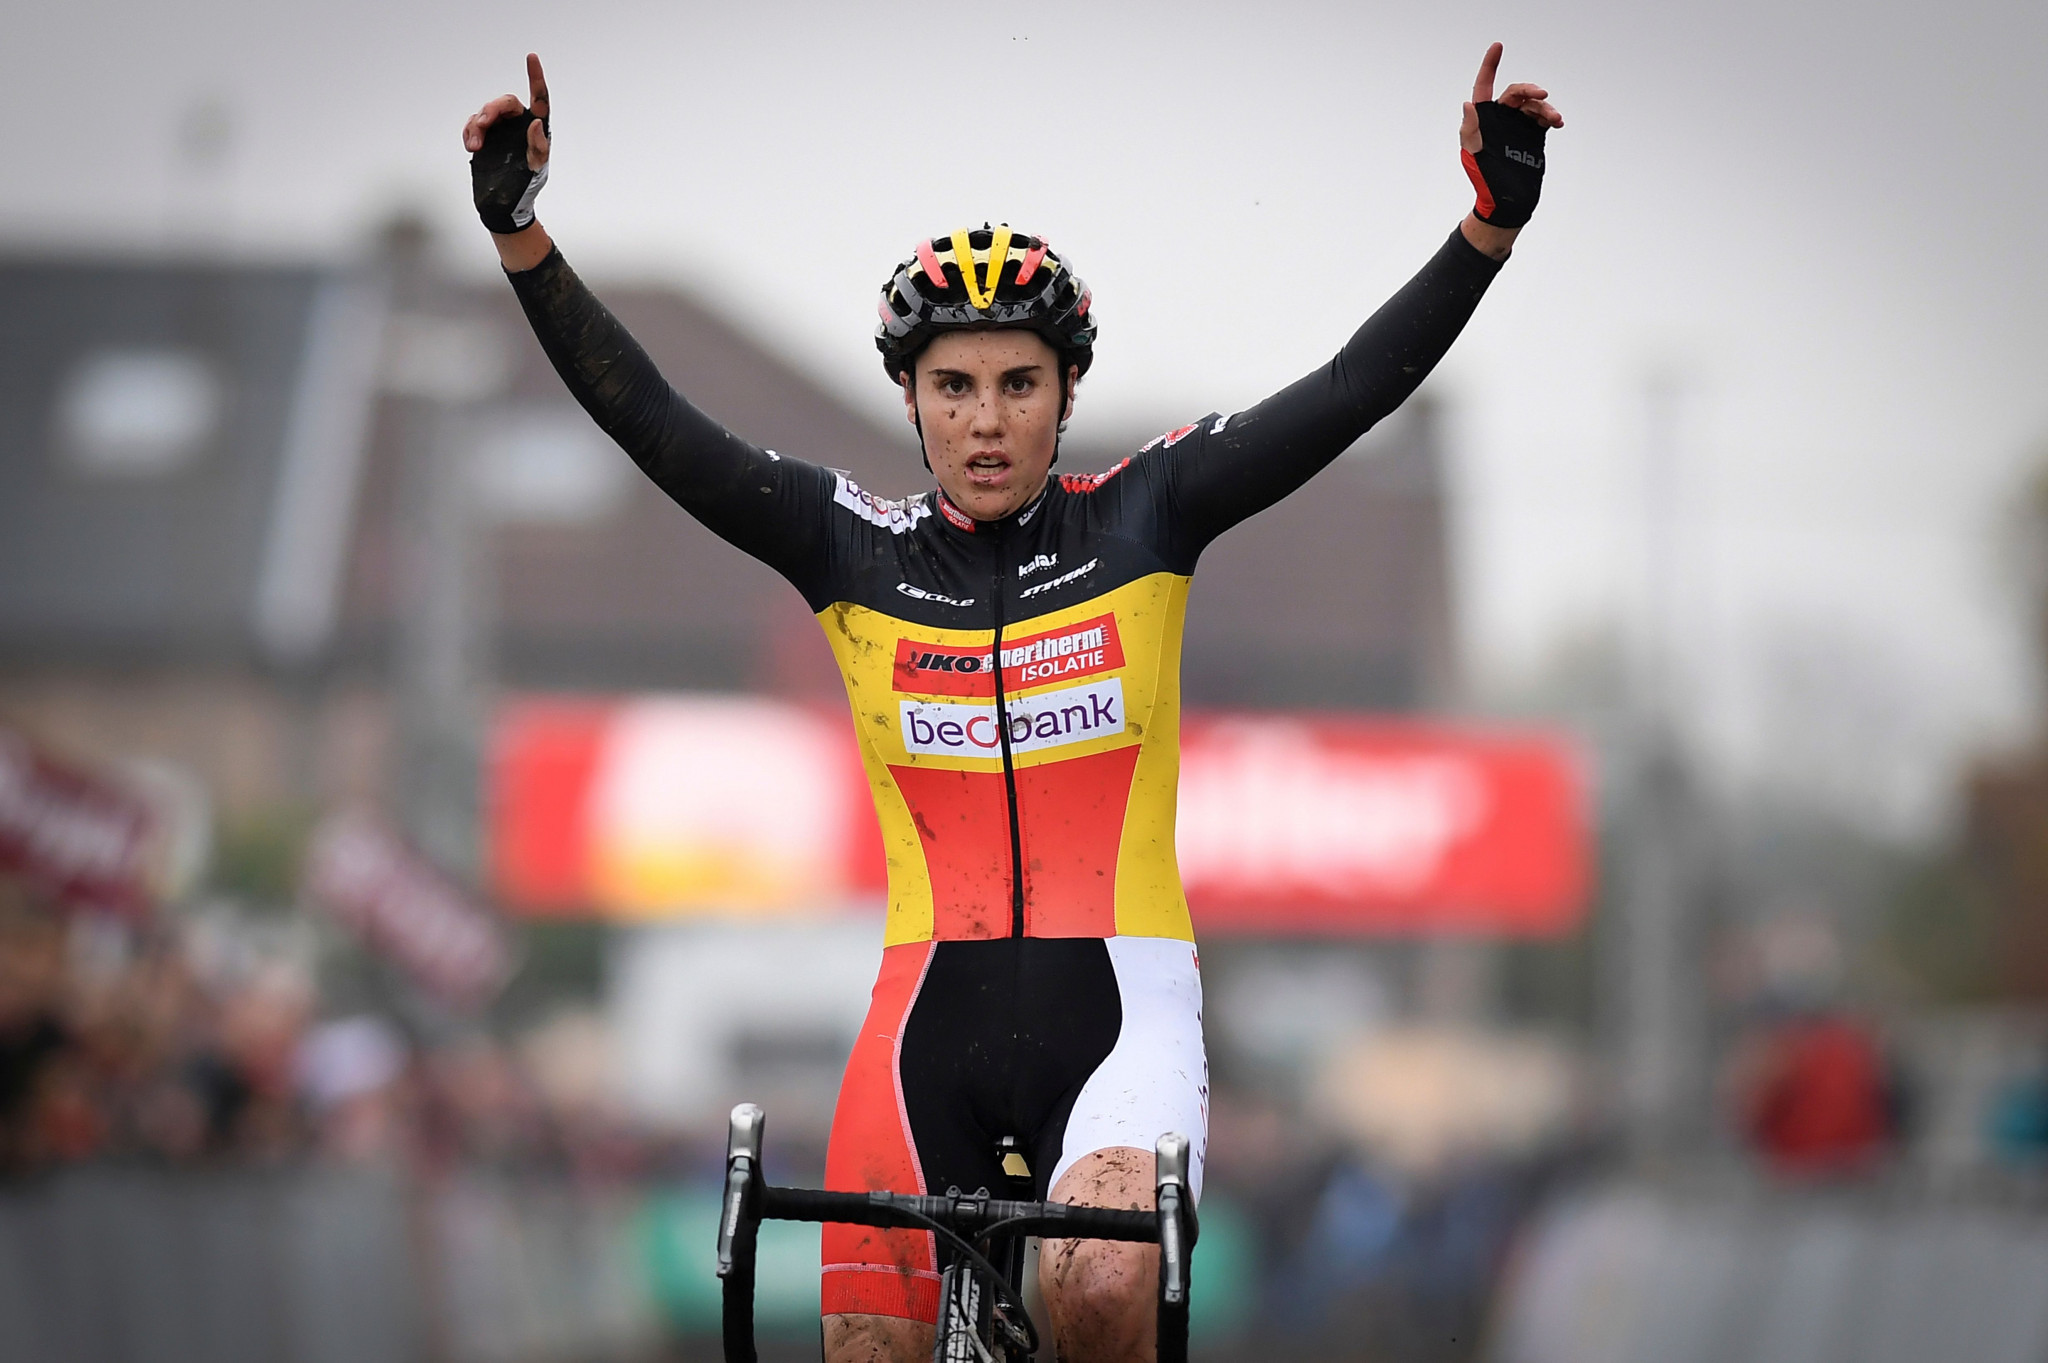 Belgium's Sanne Cant strengthened her lead at the top of the women's standings ©Getty Images